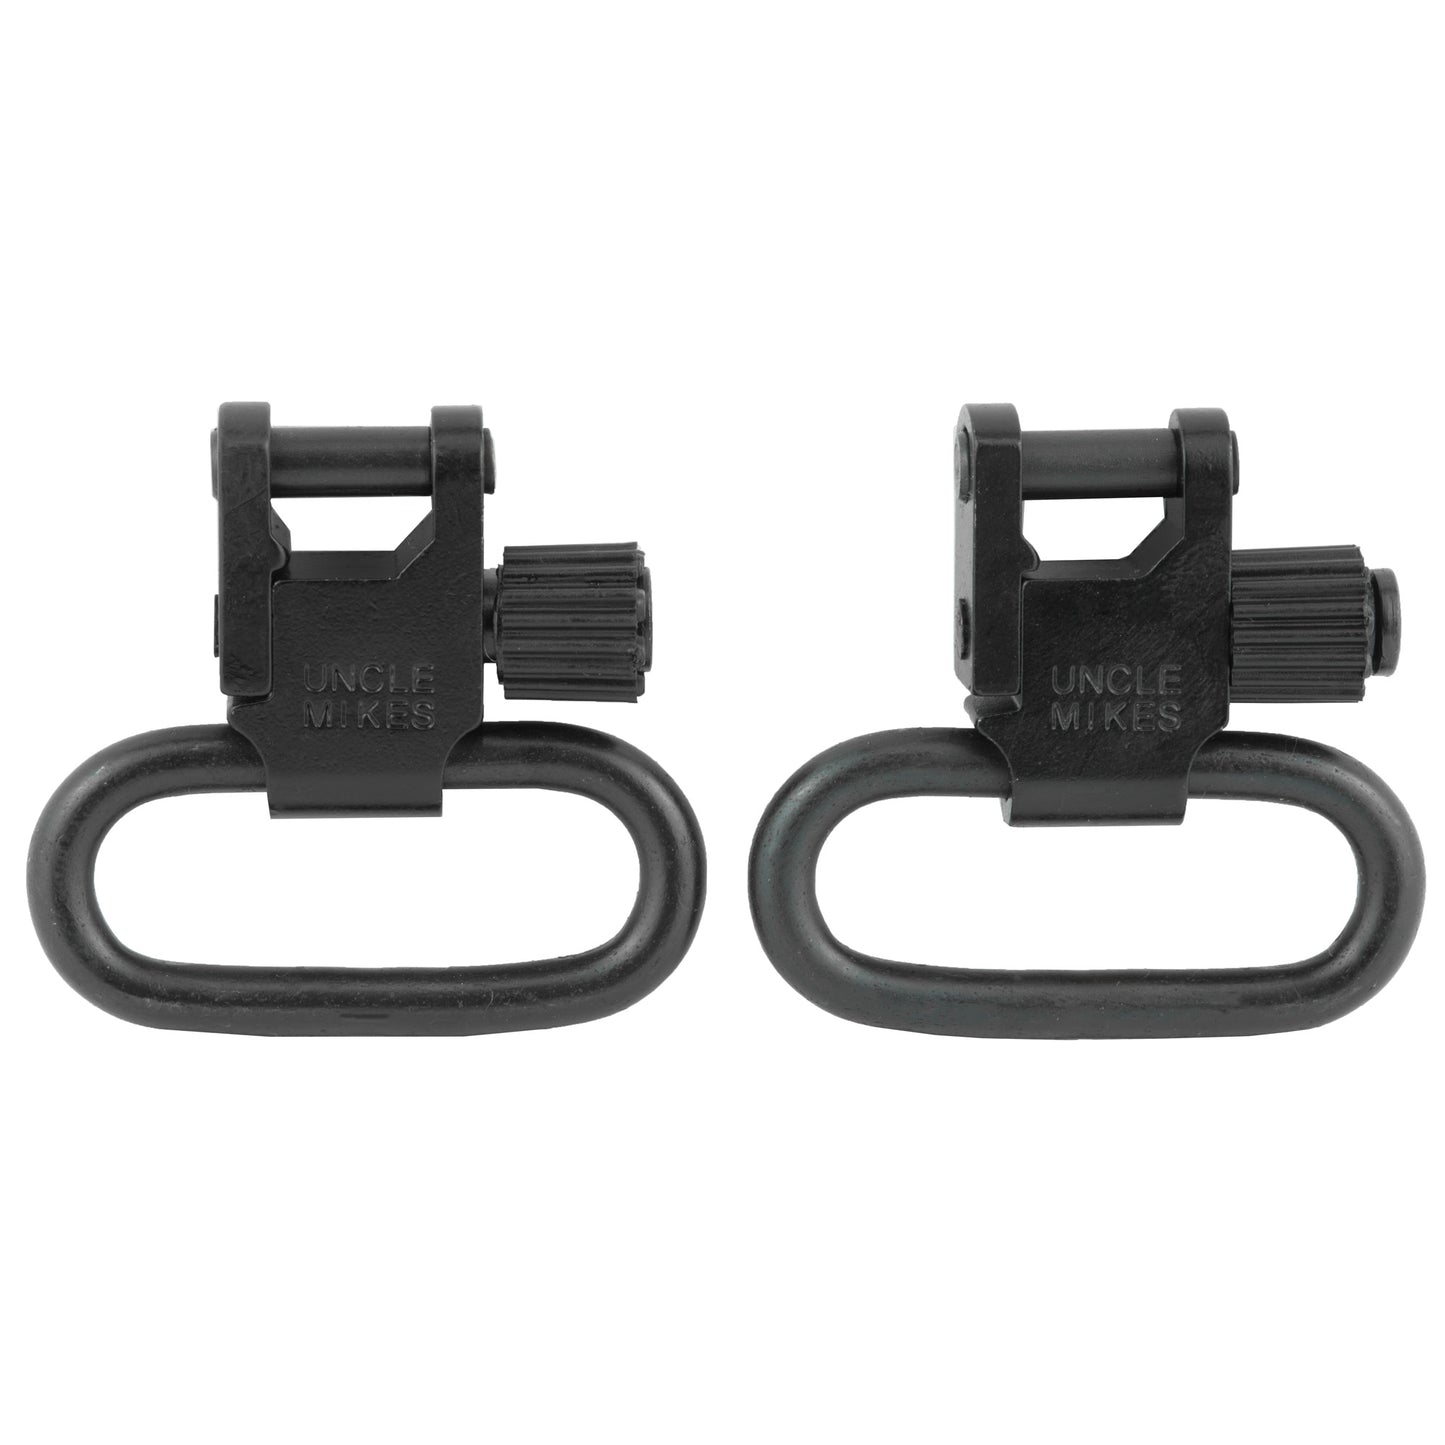 Uncle Mike's QD 115 RUG Swivel 1 Fits Ruger 10/22 No 3 Black 14612 - California Shooting Supplies